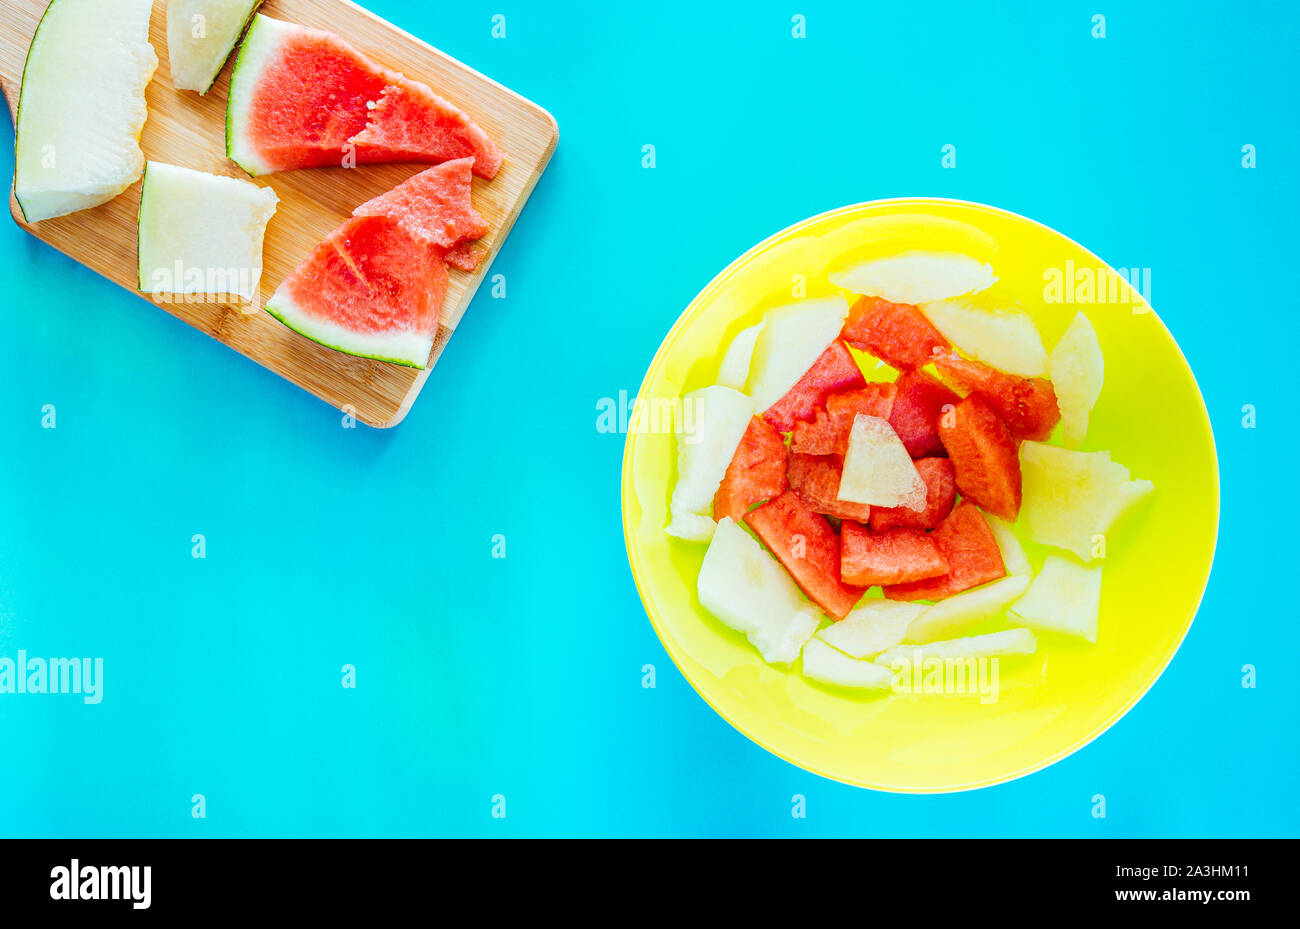 Healthy dessert for a summer picnic with fresh melon and wedges of juicy watermelon viewed from above in a flat lay still life, blue background Stock Photo